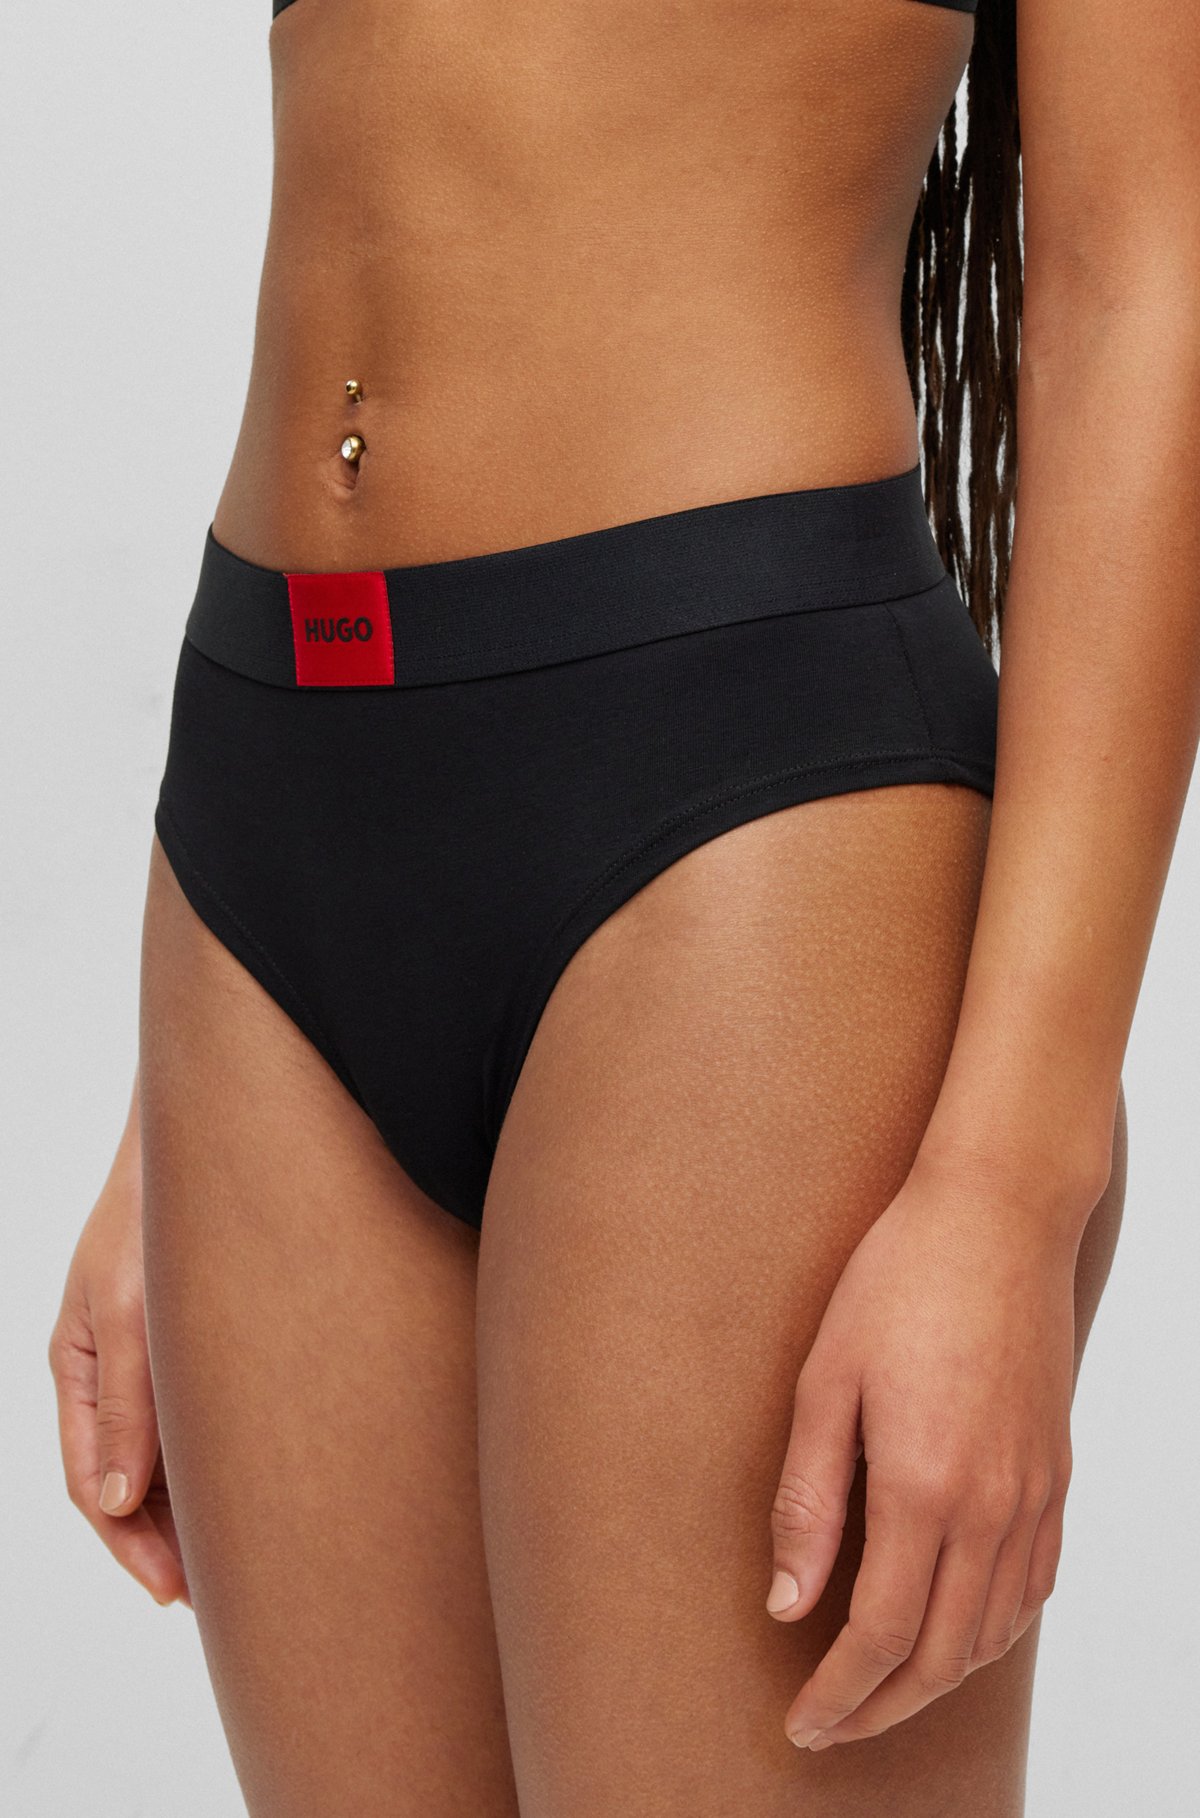 High-waisted stretch-cotton briefs with red logo label, Black